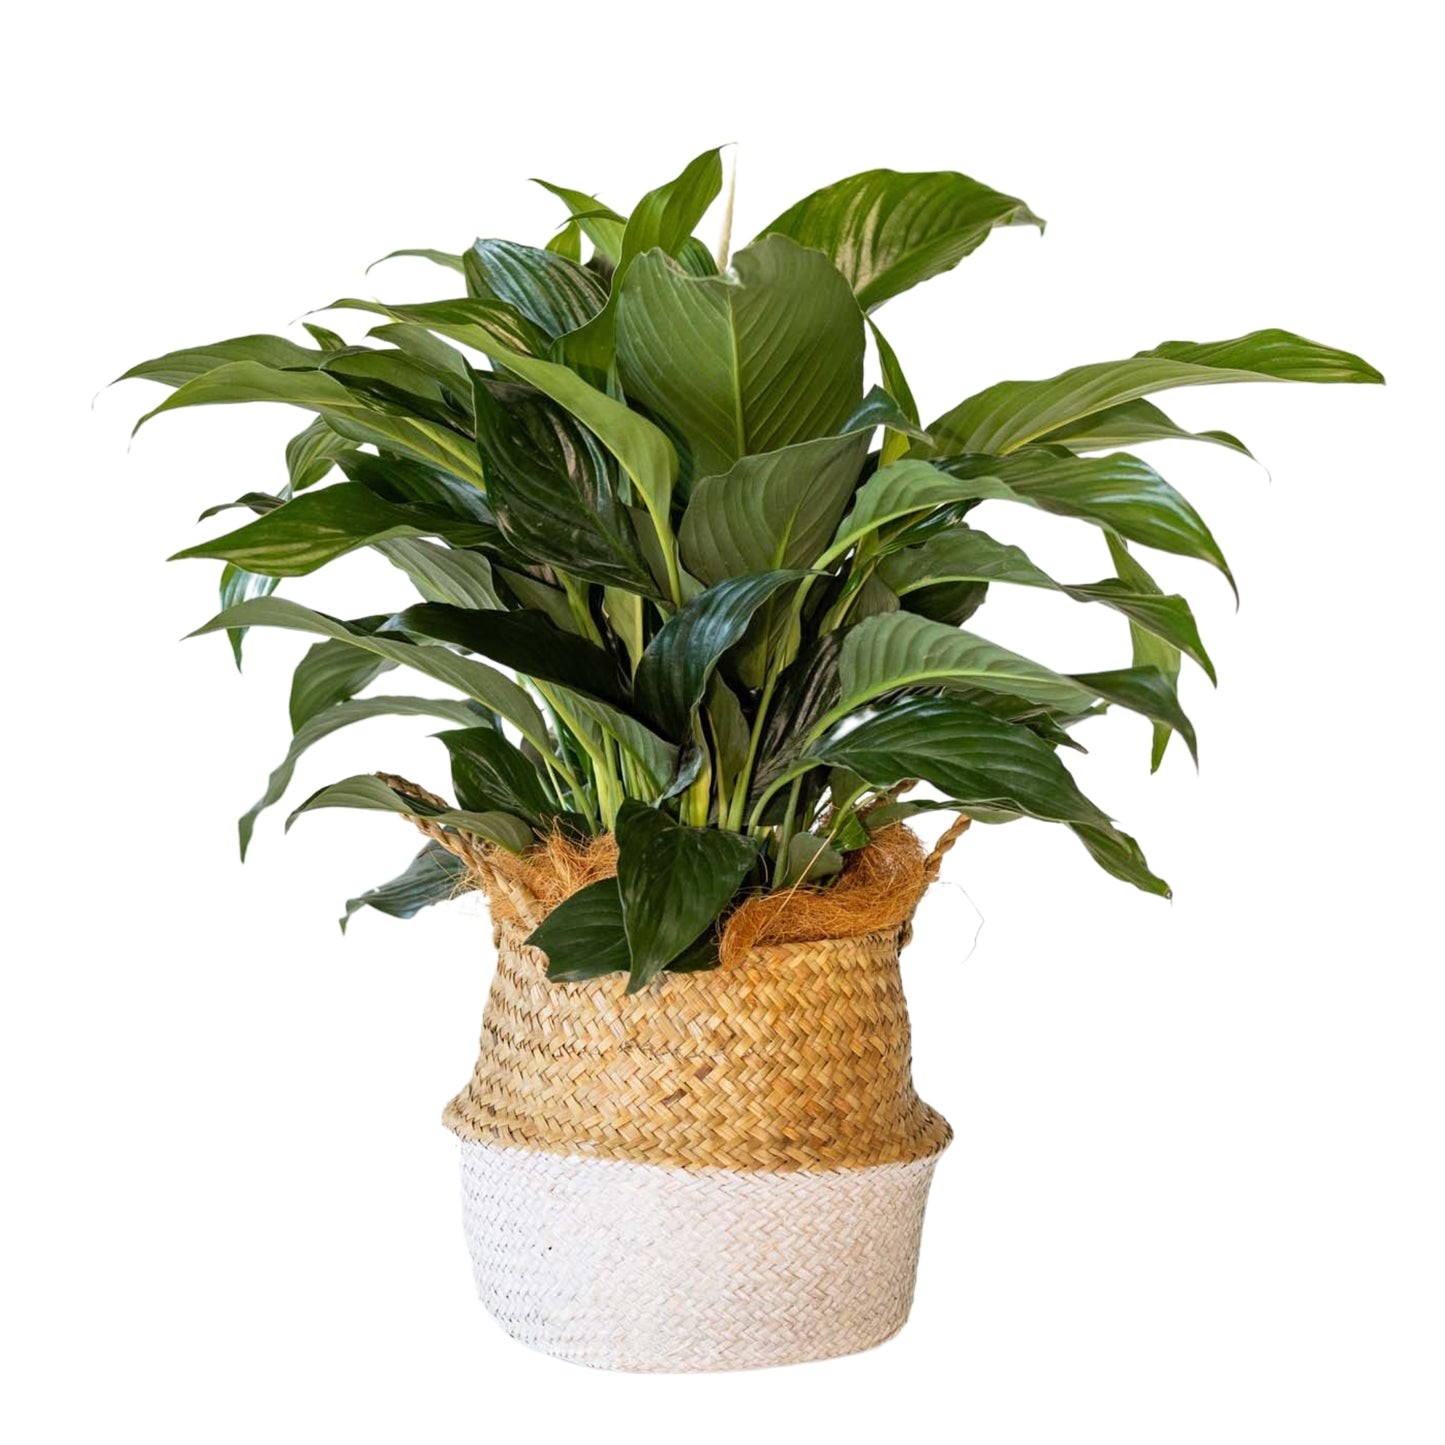 Spath (Peace Lily)